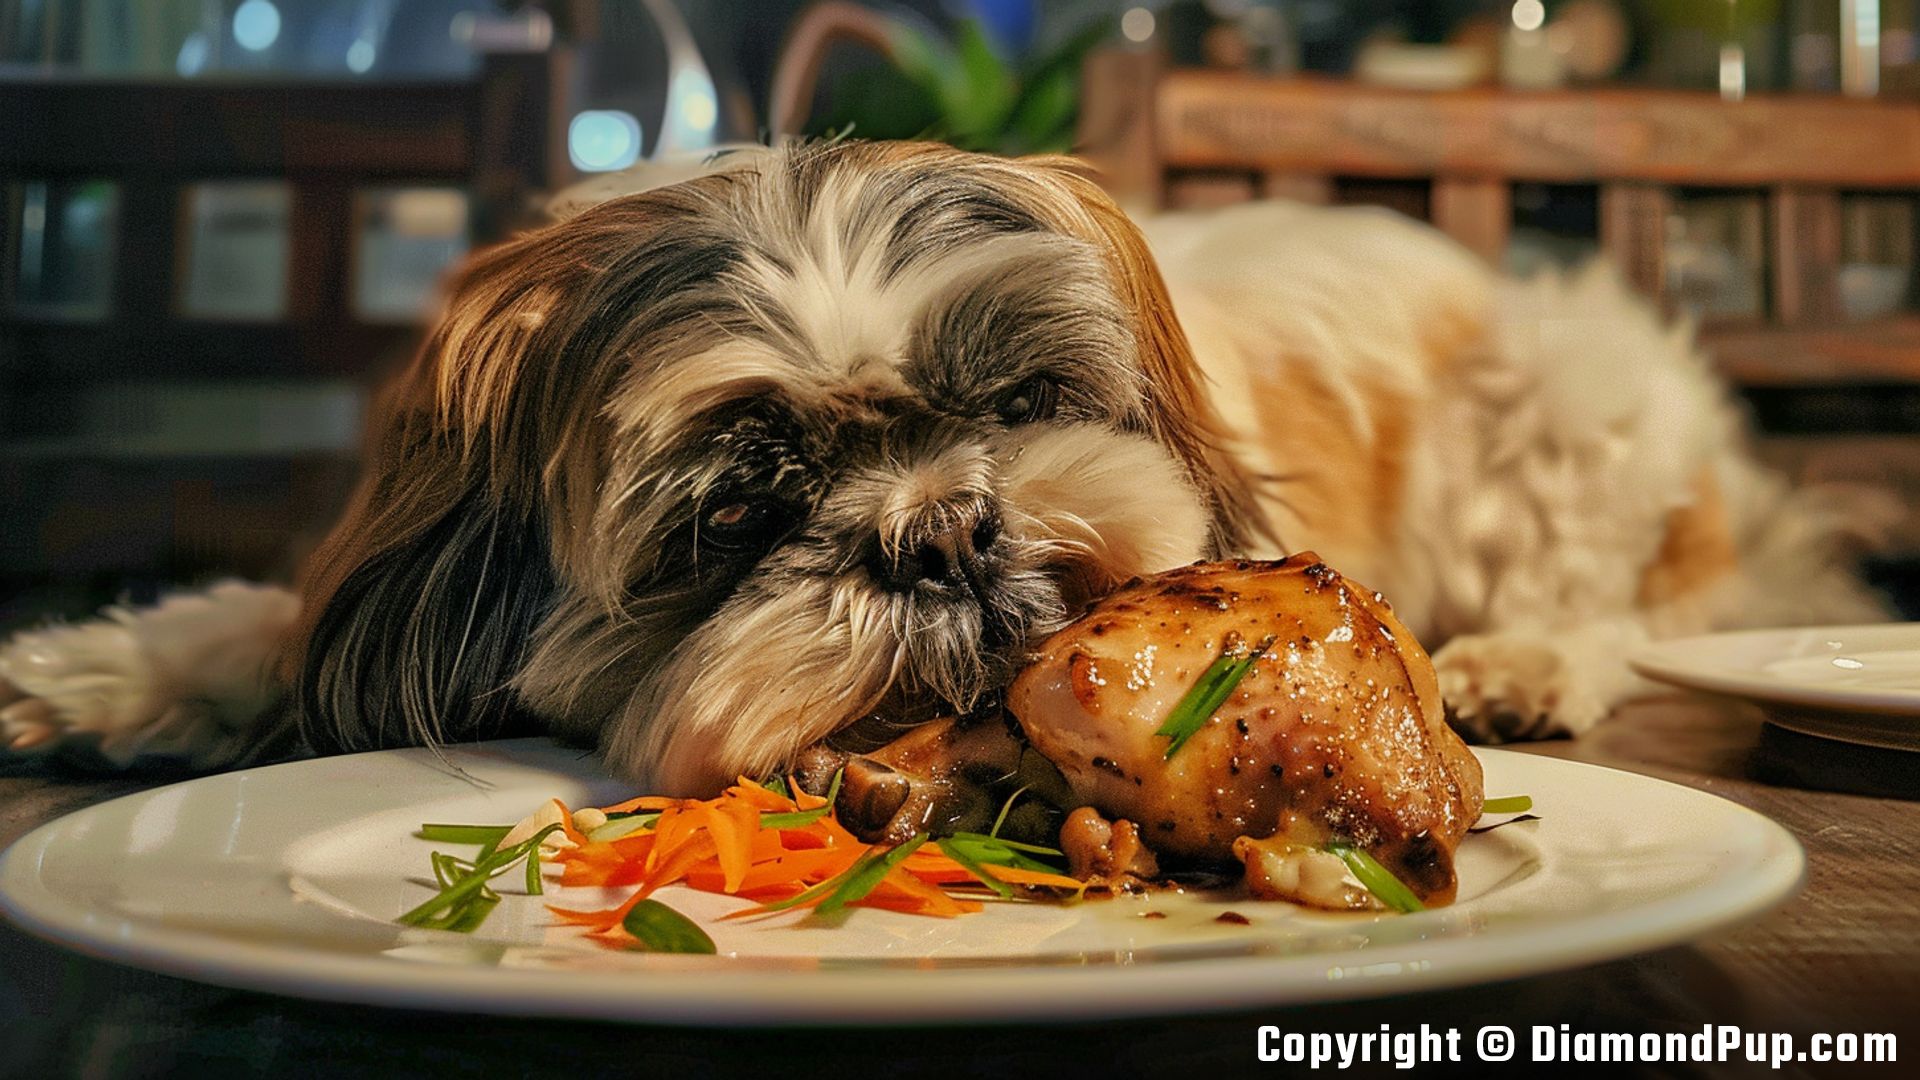 Photograph of a Happy Shih Tzu Eating Chicken